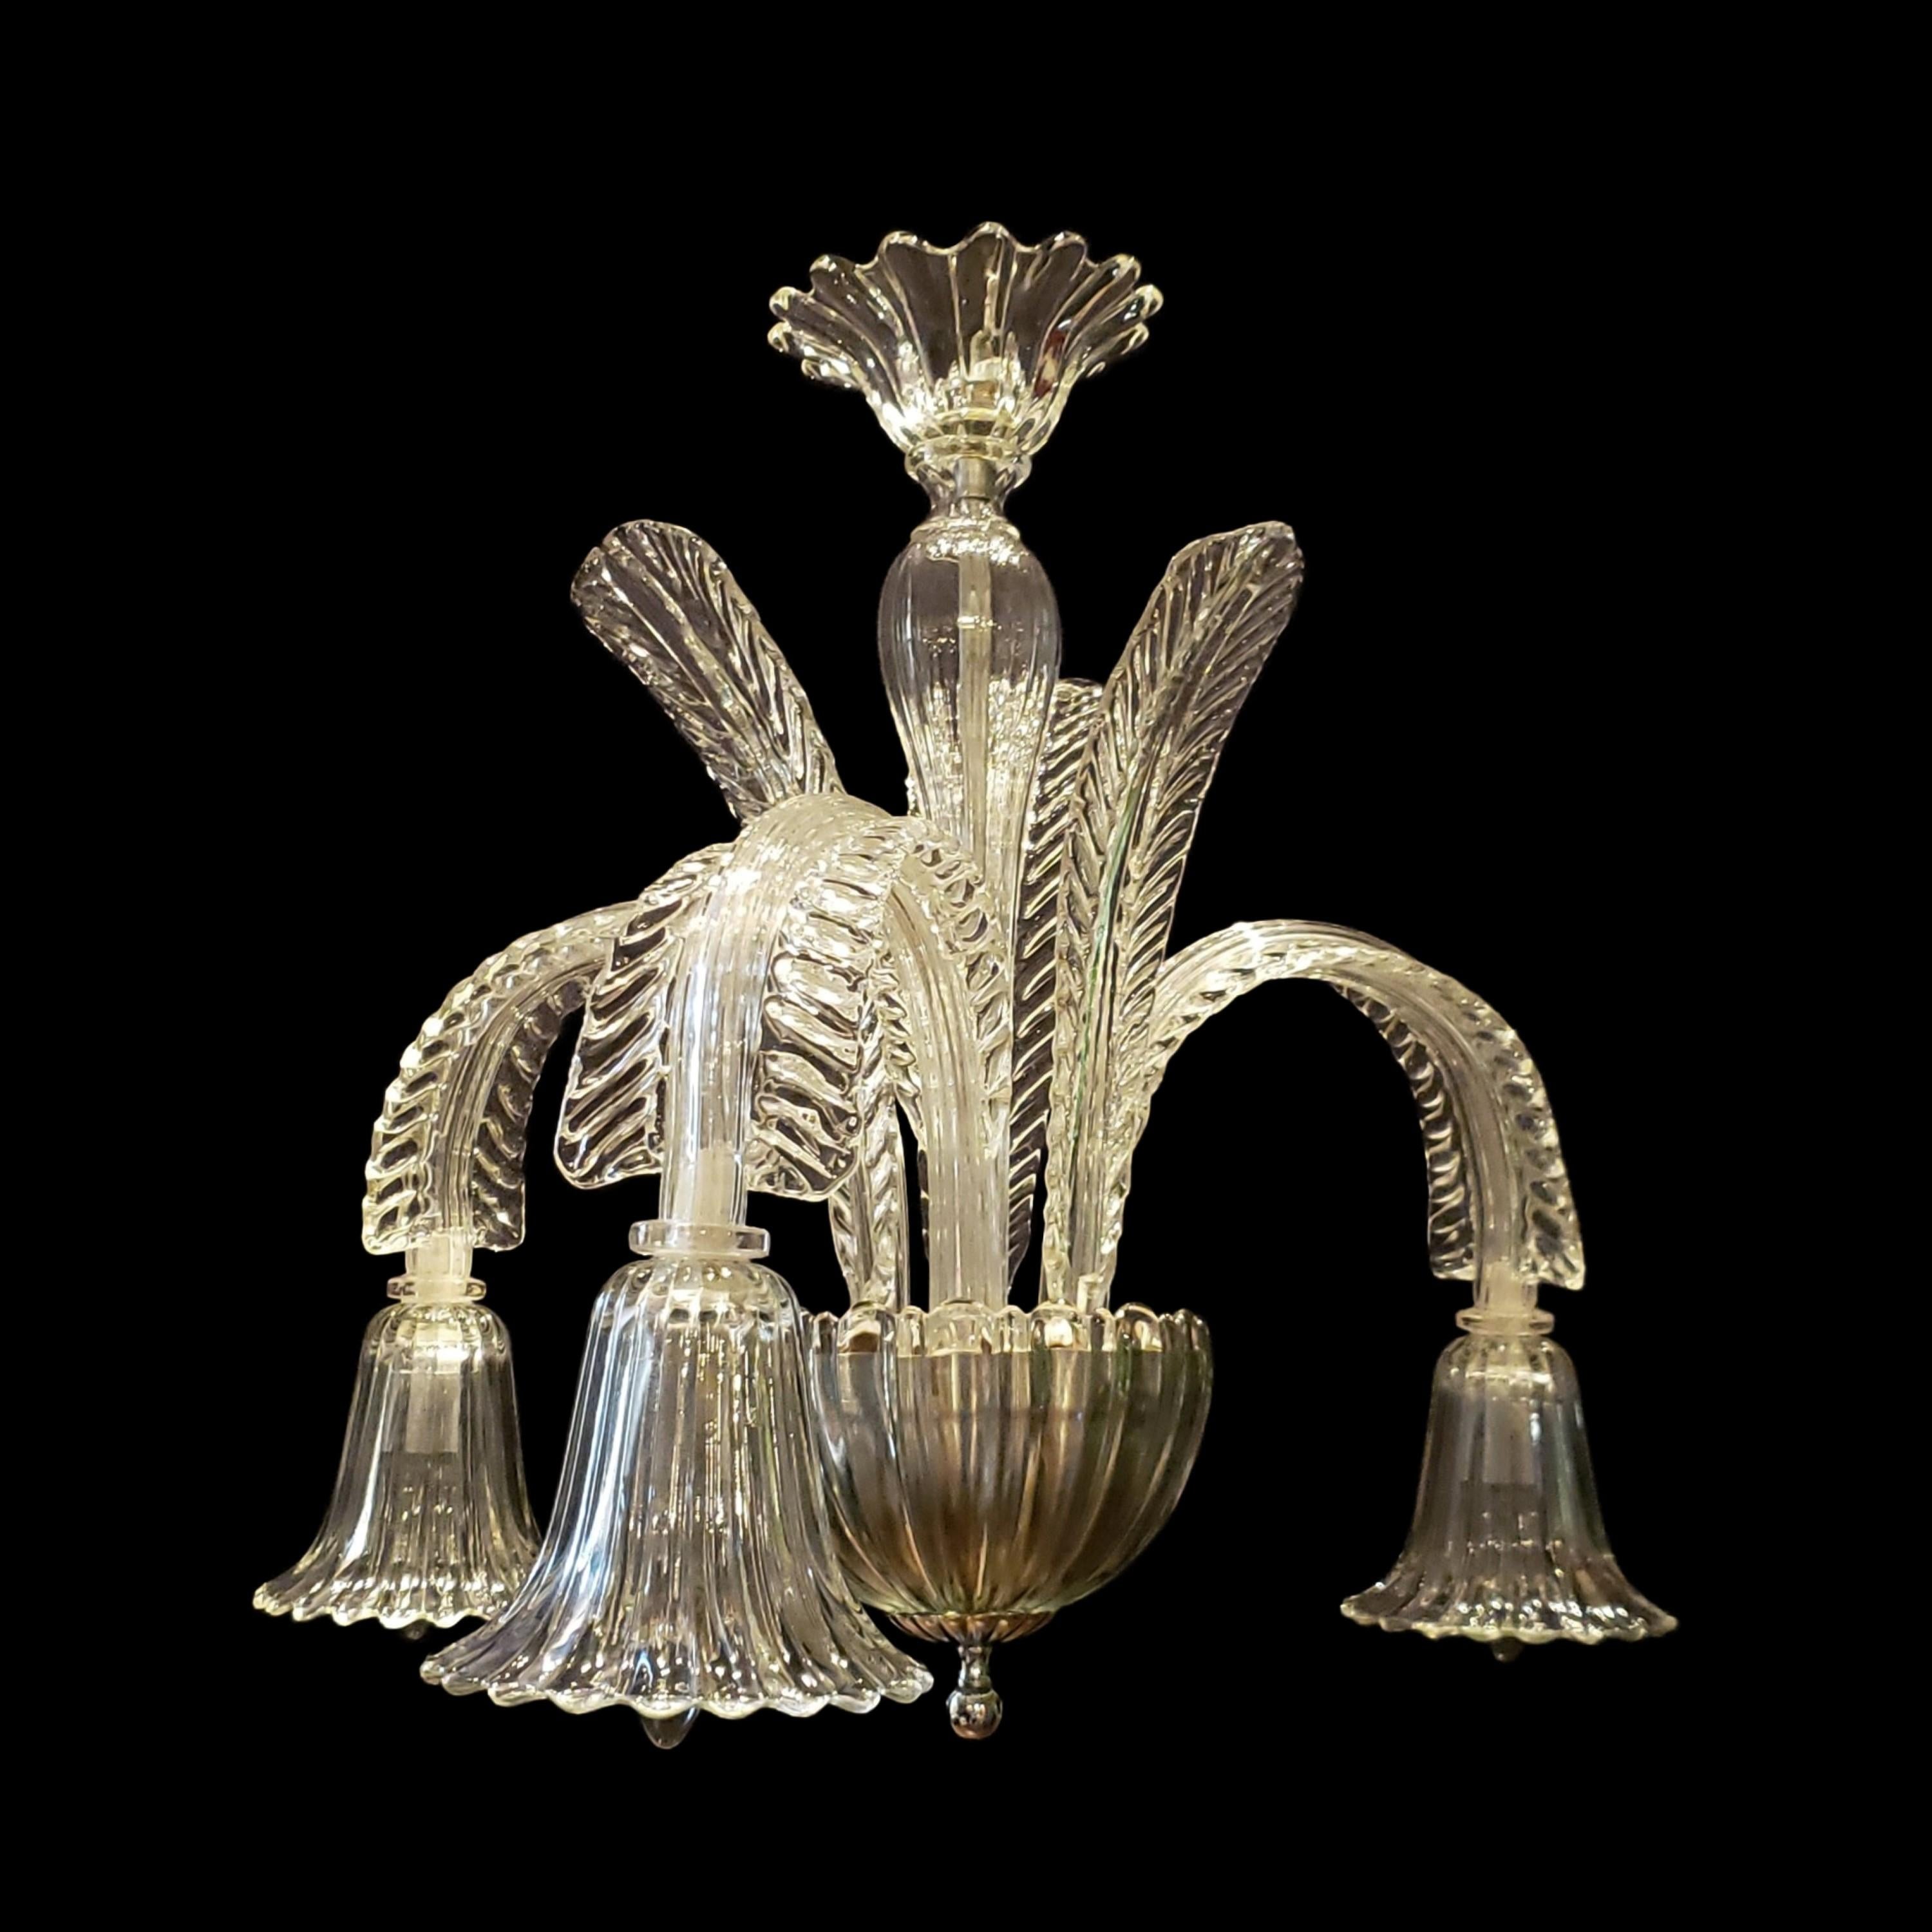 20th Century Italian hand made Murano crystal chandelier. Features three heavy down light crystal shades hanging from leaf arms with matching upright leaves. This comes rewired and ready to install. Ships disassembled. Cleaned and restored. Please